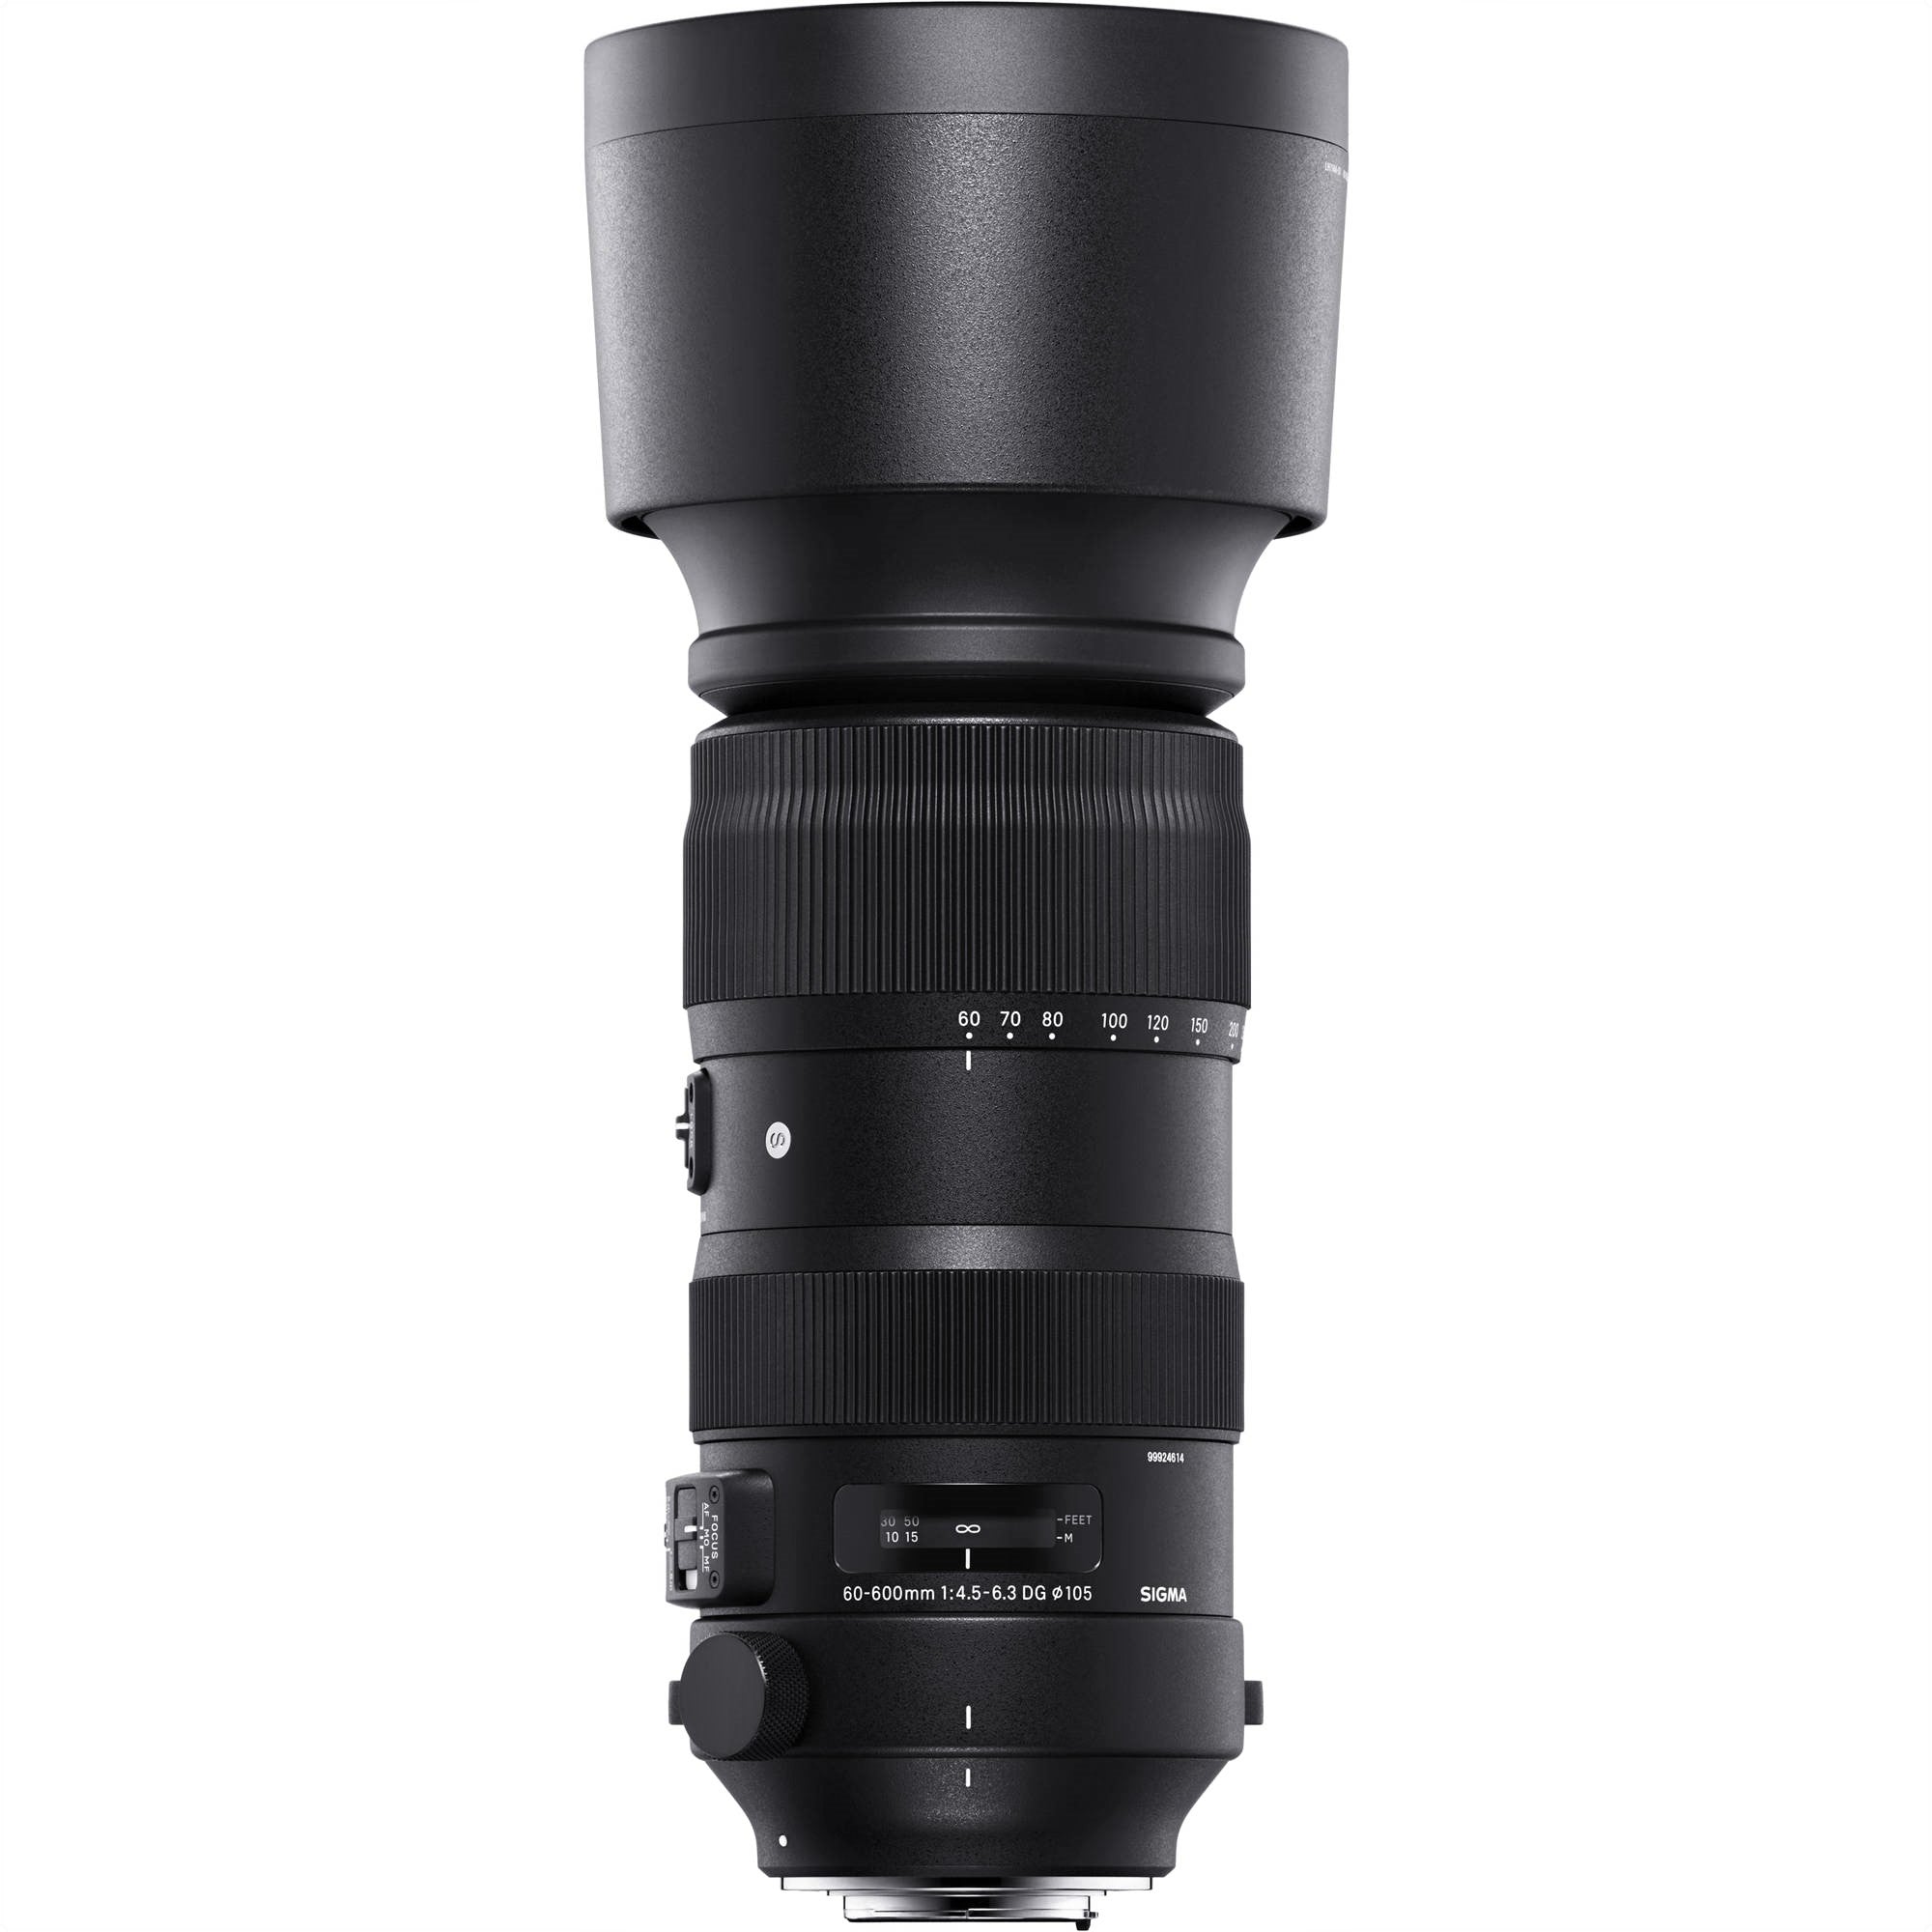 Sigma 60-600mm F4.5-6.3 DG OS HSM Sports Lens for Nikon F with Attached Lens Hood on the Top